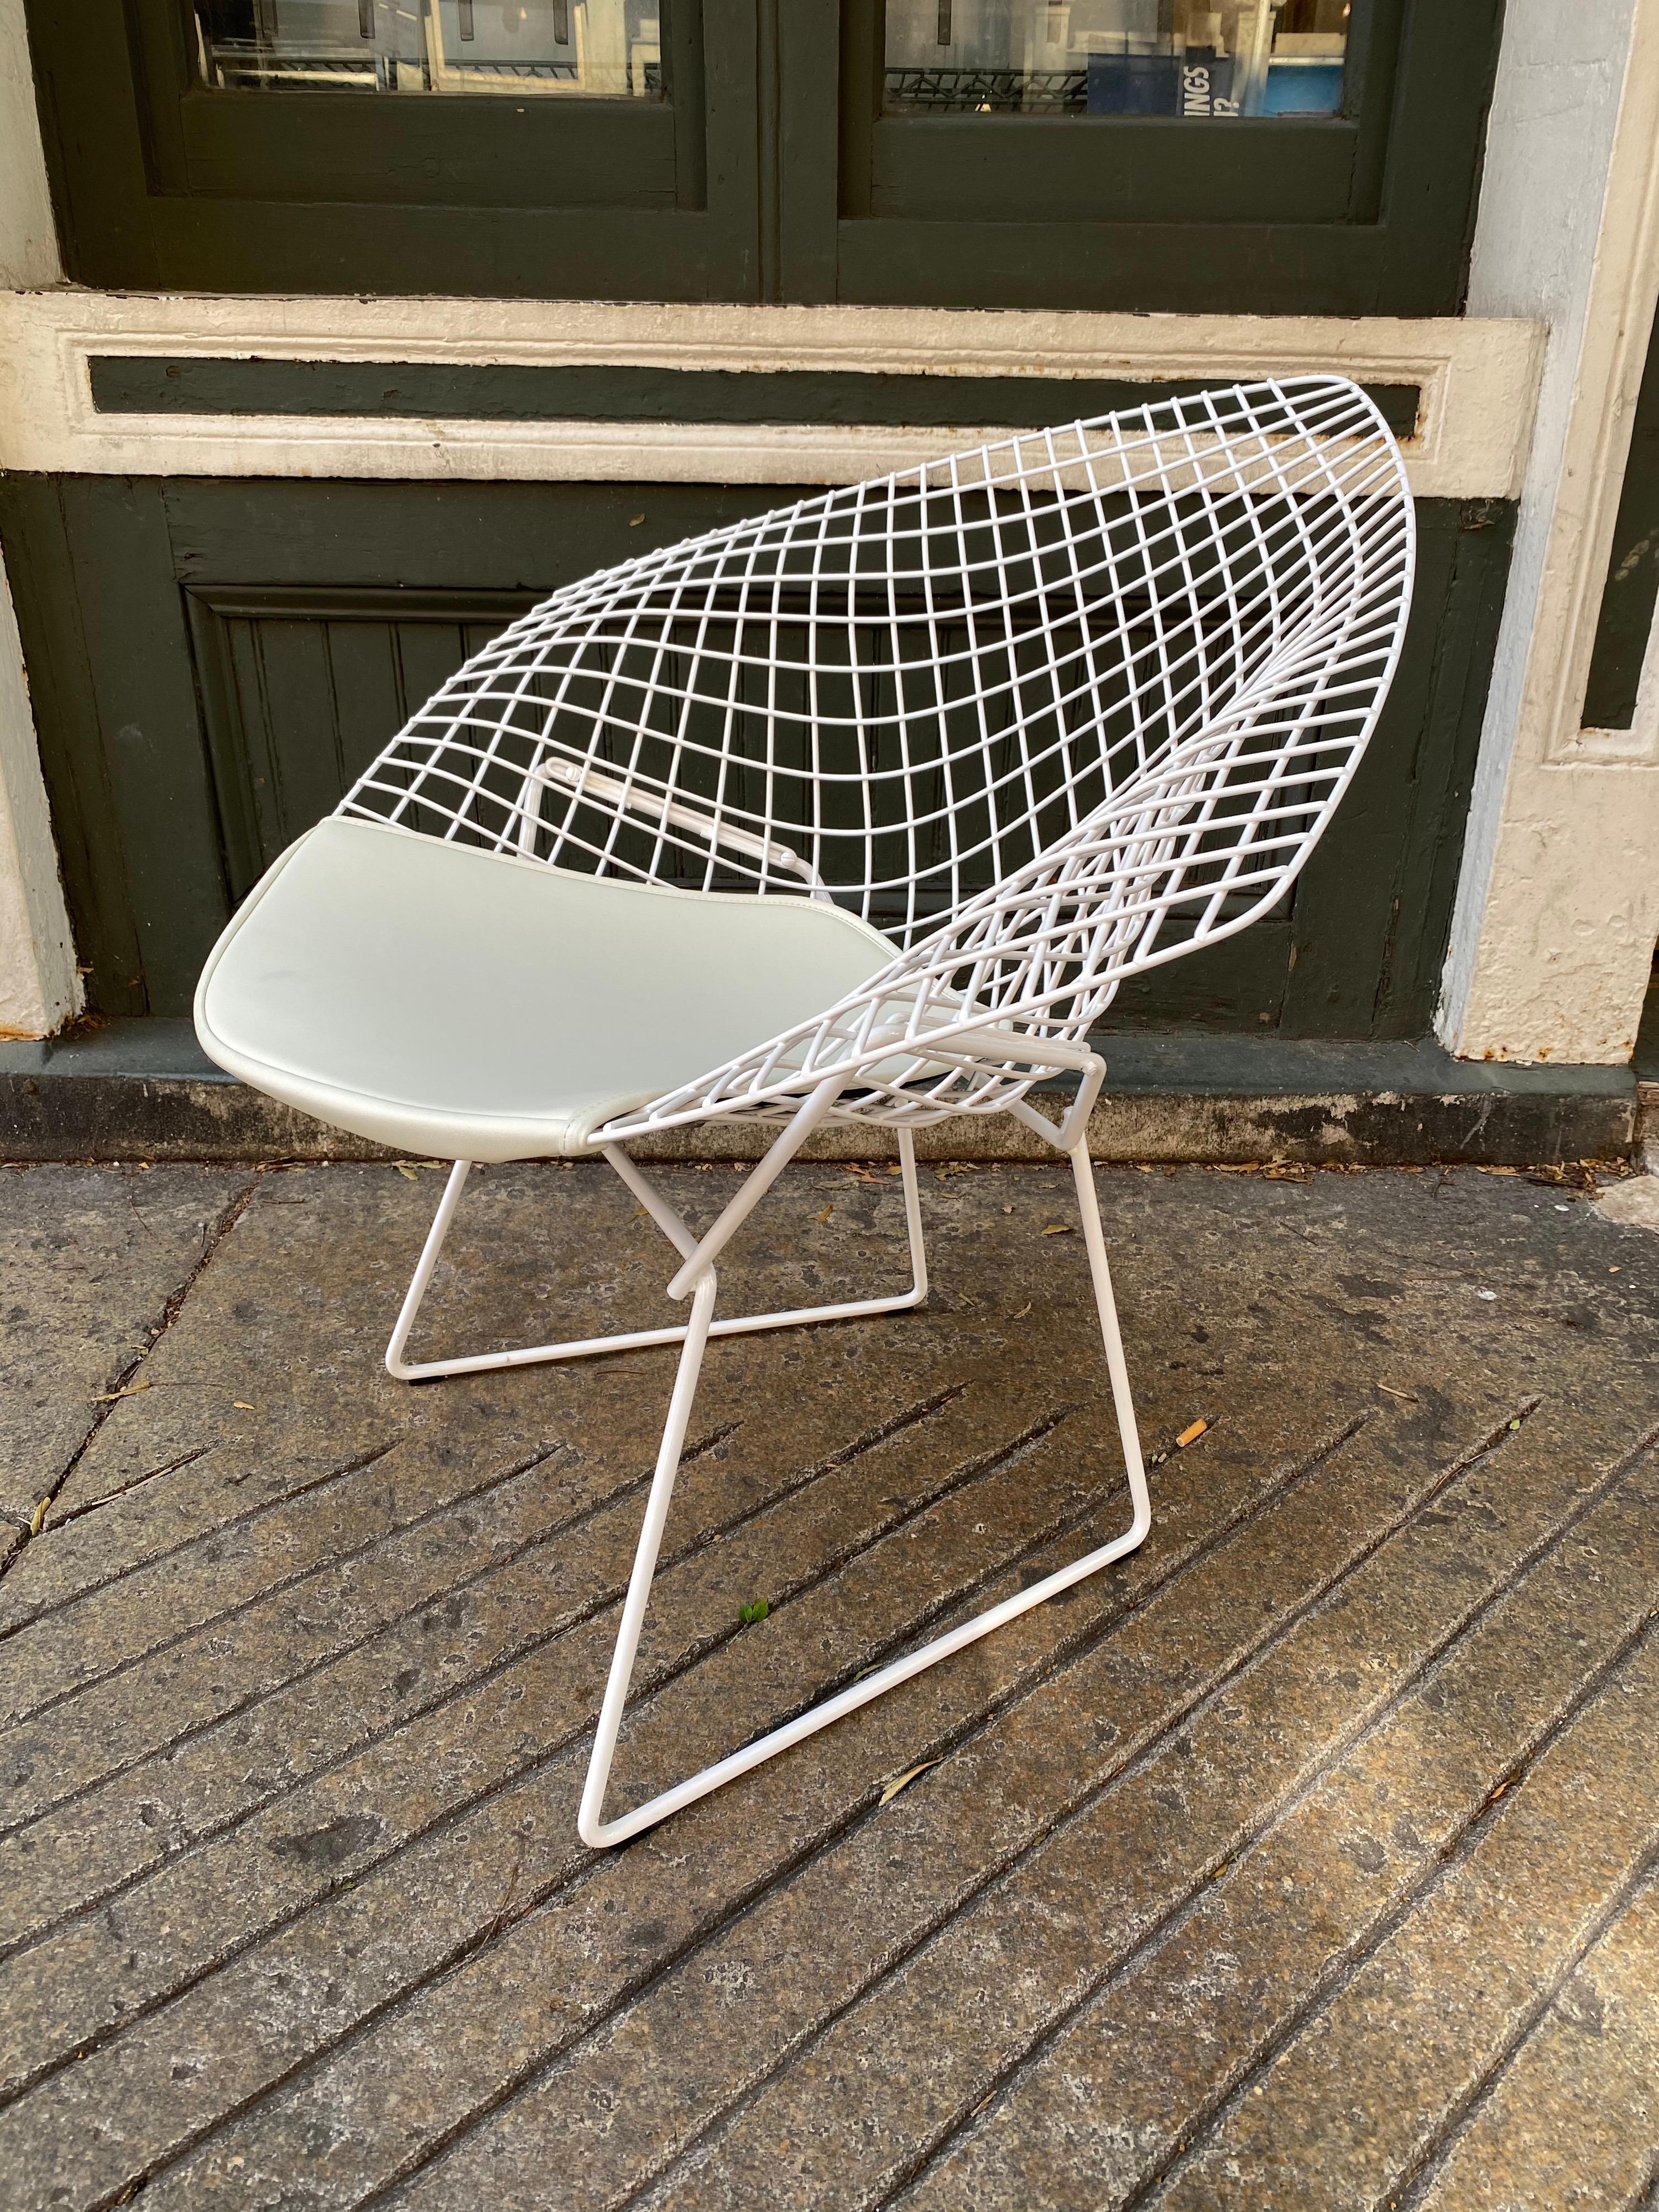 Bertoia for Knoll diamond chair with cinyl seat pad. 5 or 6 year old chair that has never really been sat in before! Comes with plastic cover and edge molding from packaging. Extremely Clean Condition! 1500 to buy new!